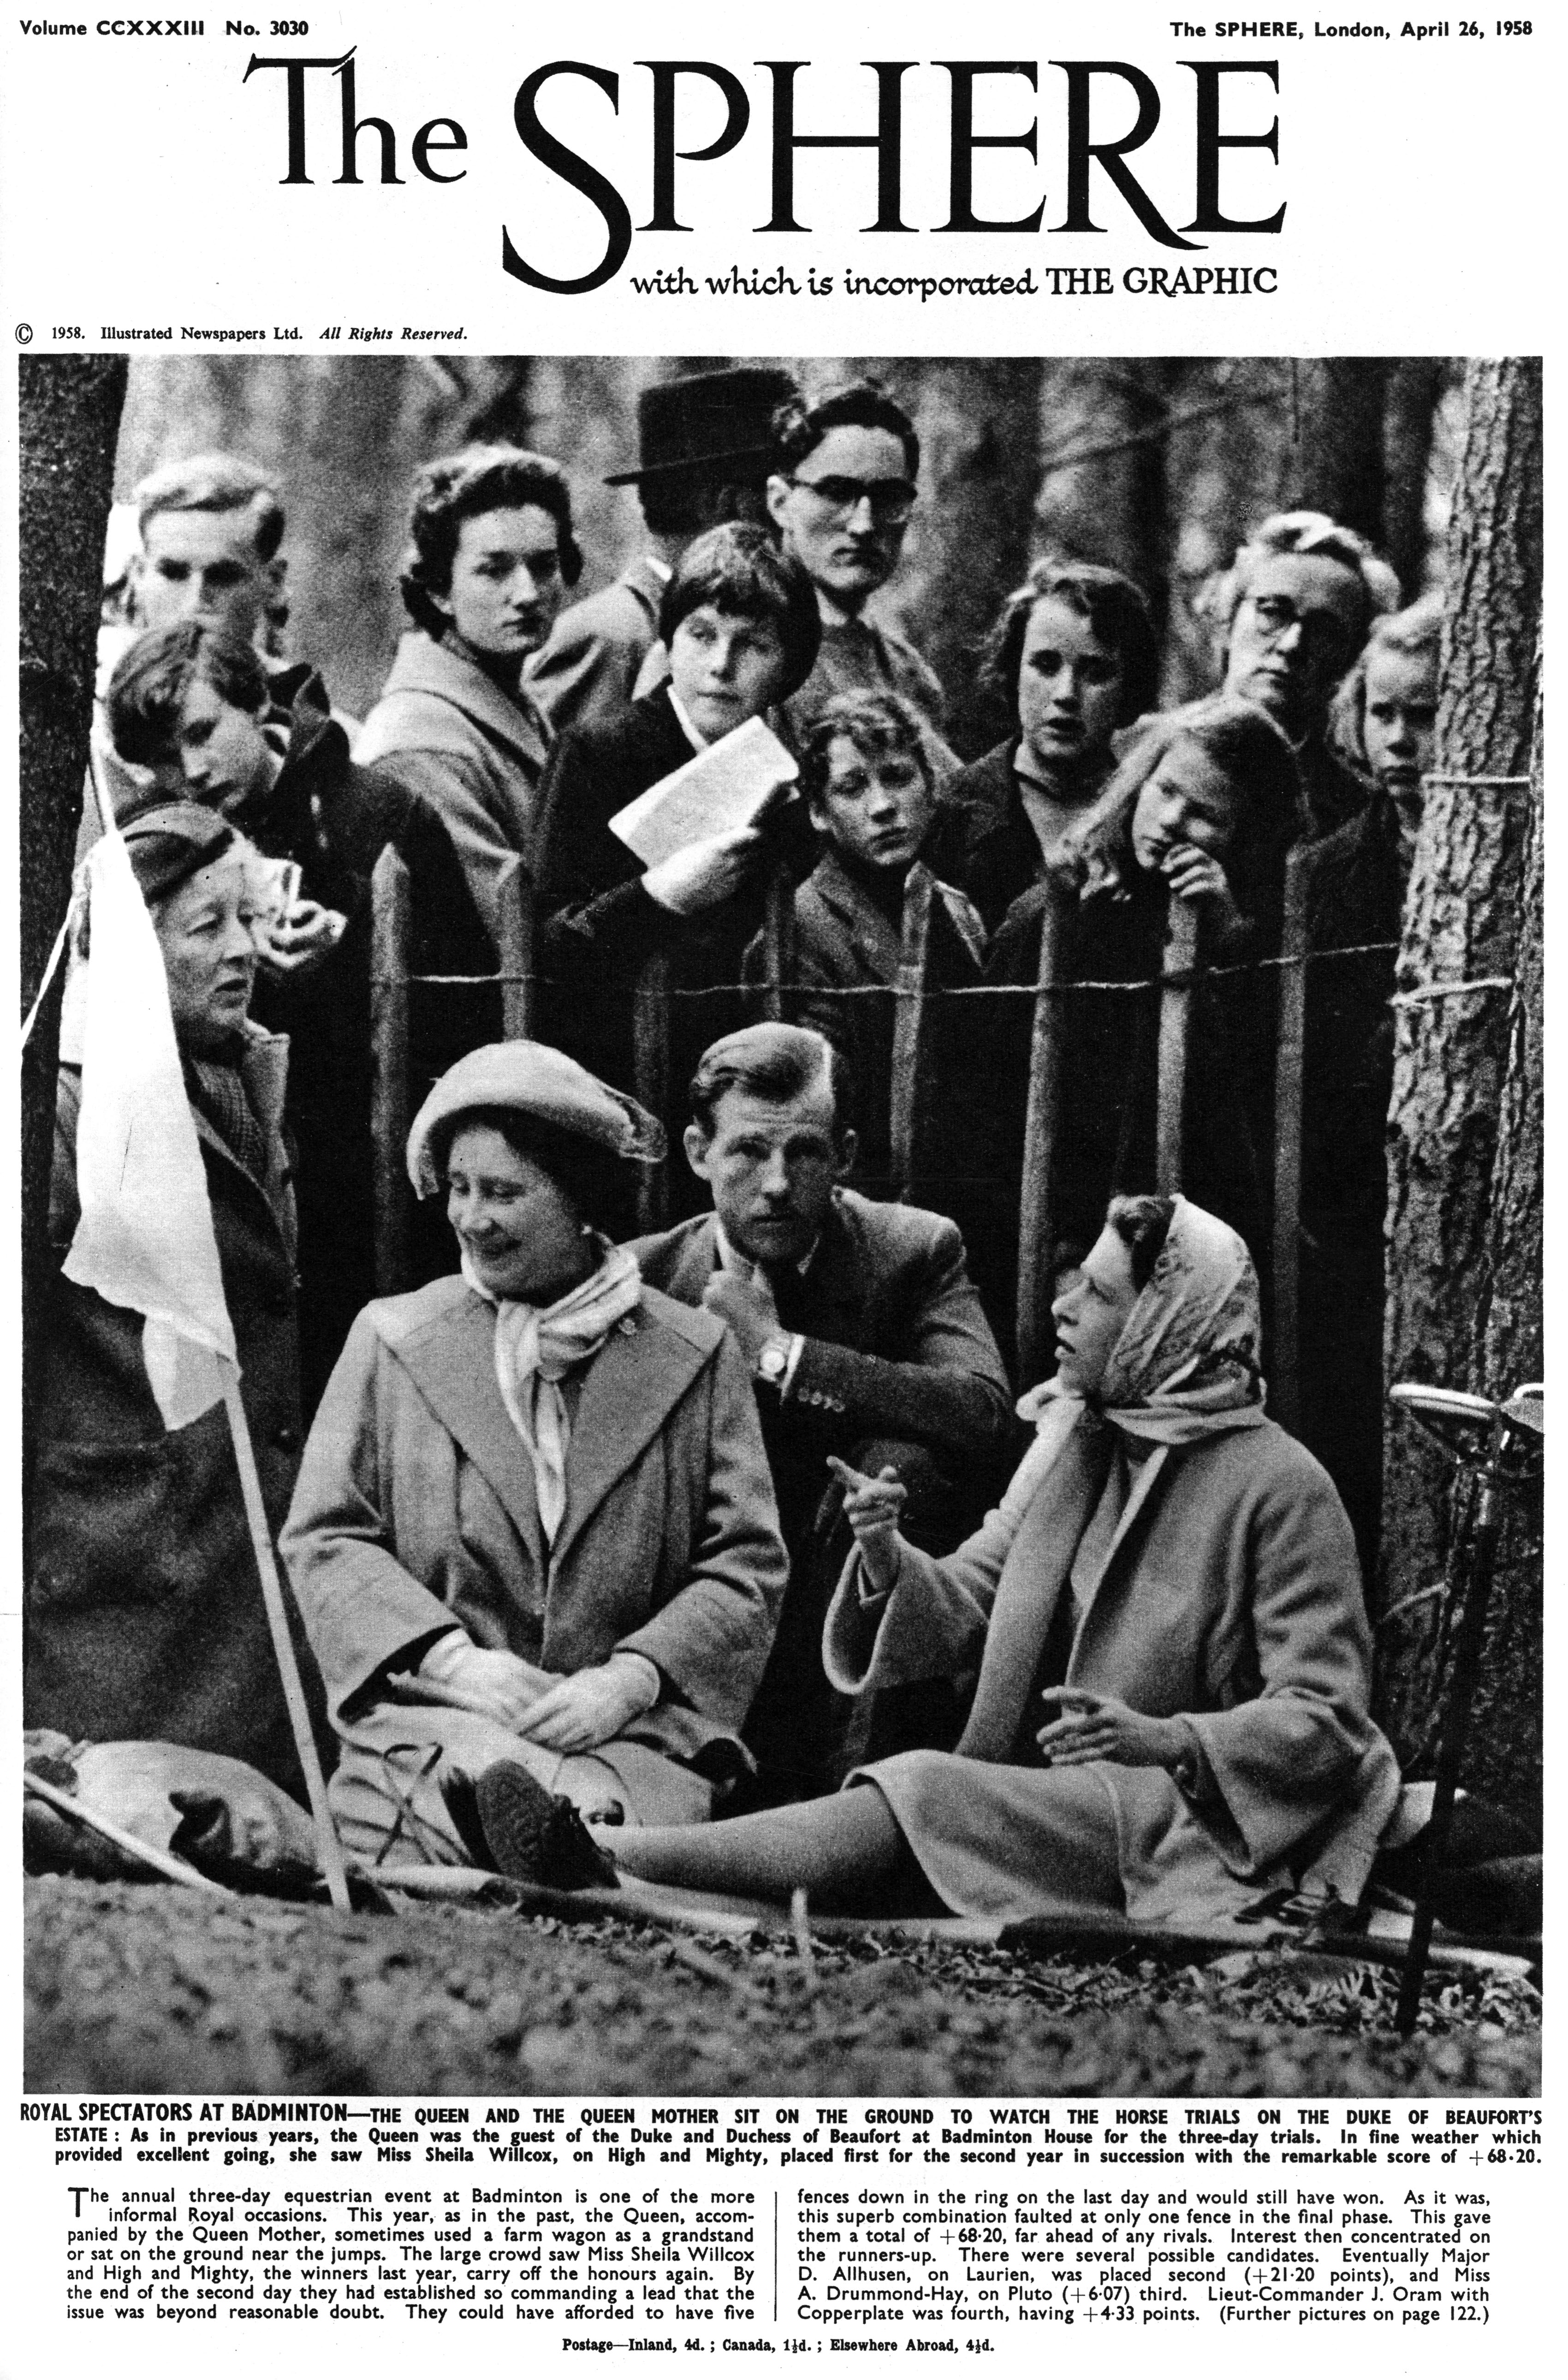 First Anniversary The Queen’s Death - The Queen and Queen Mother sit on the ground of the Duke of Beaufort's Estate to watch the horse trials in 1958